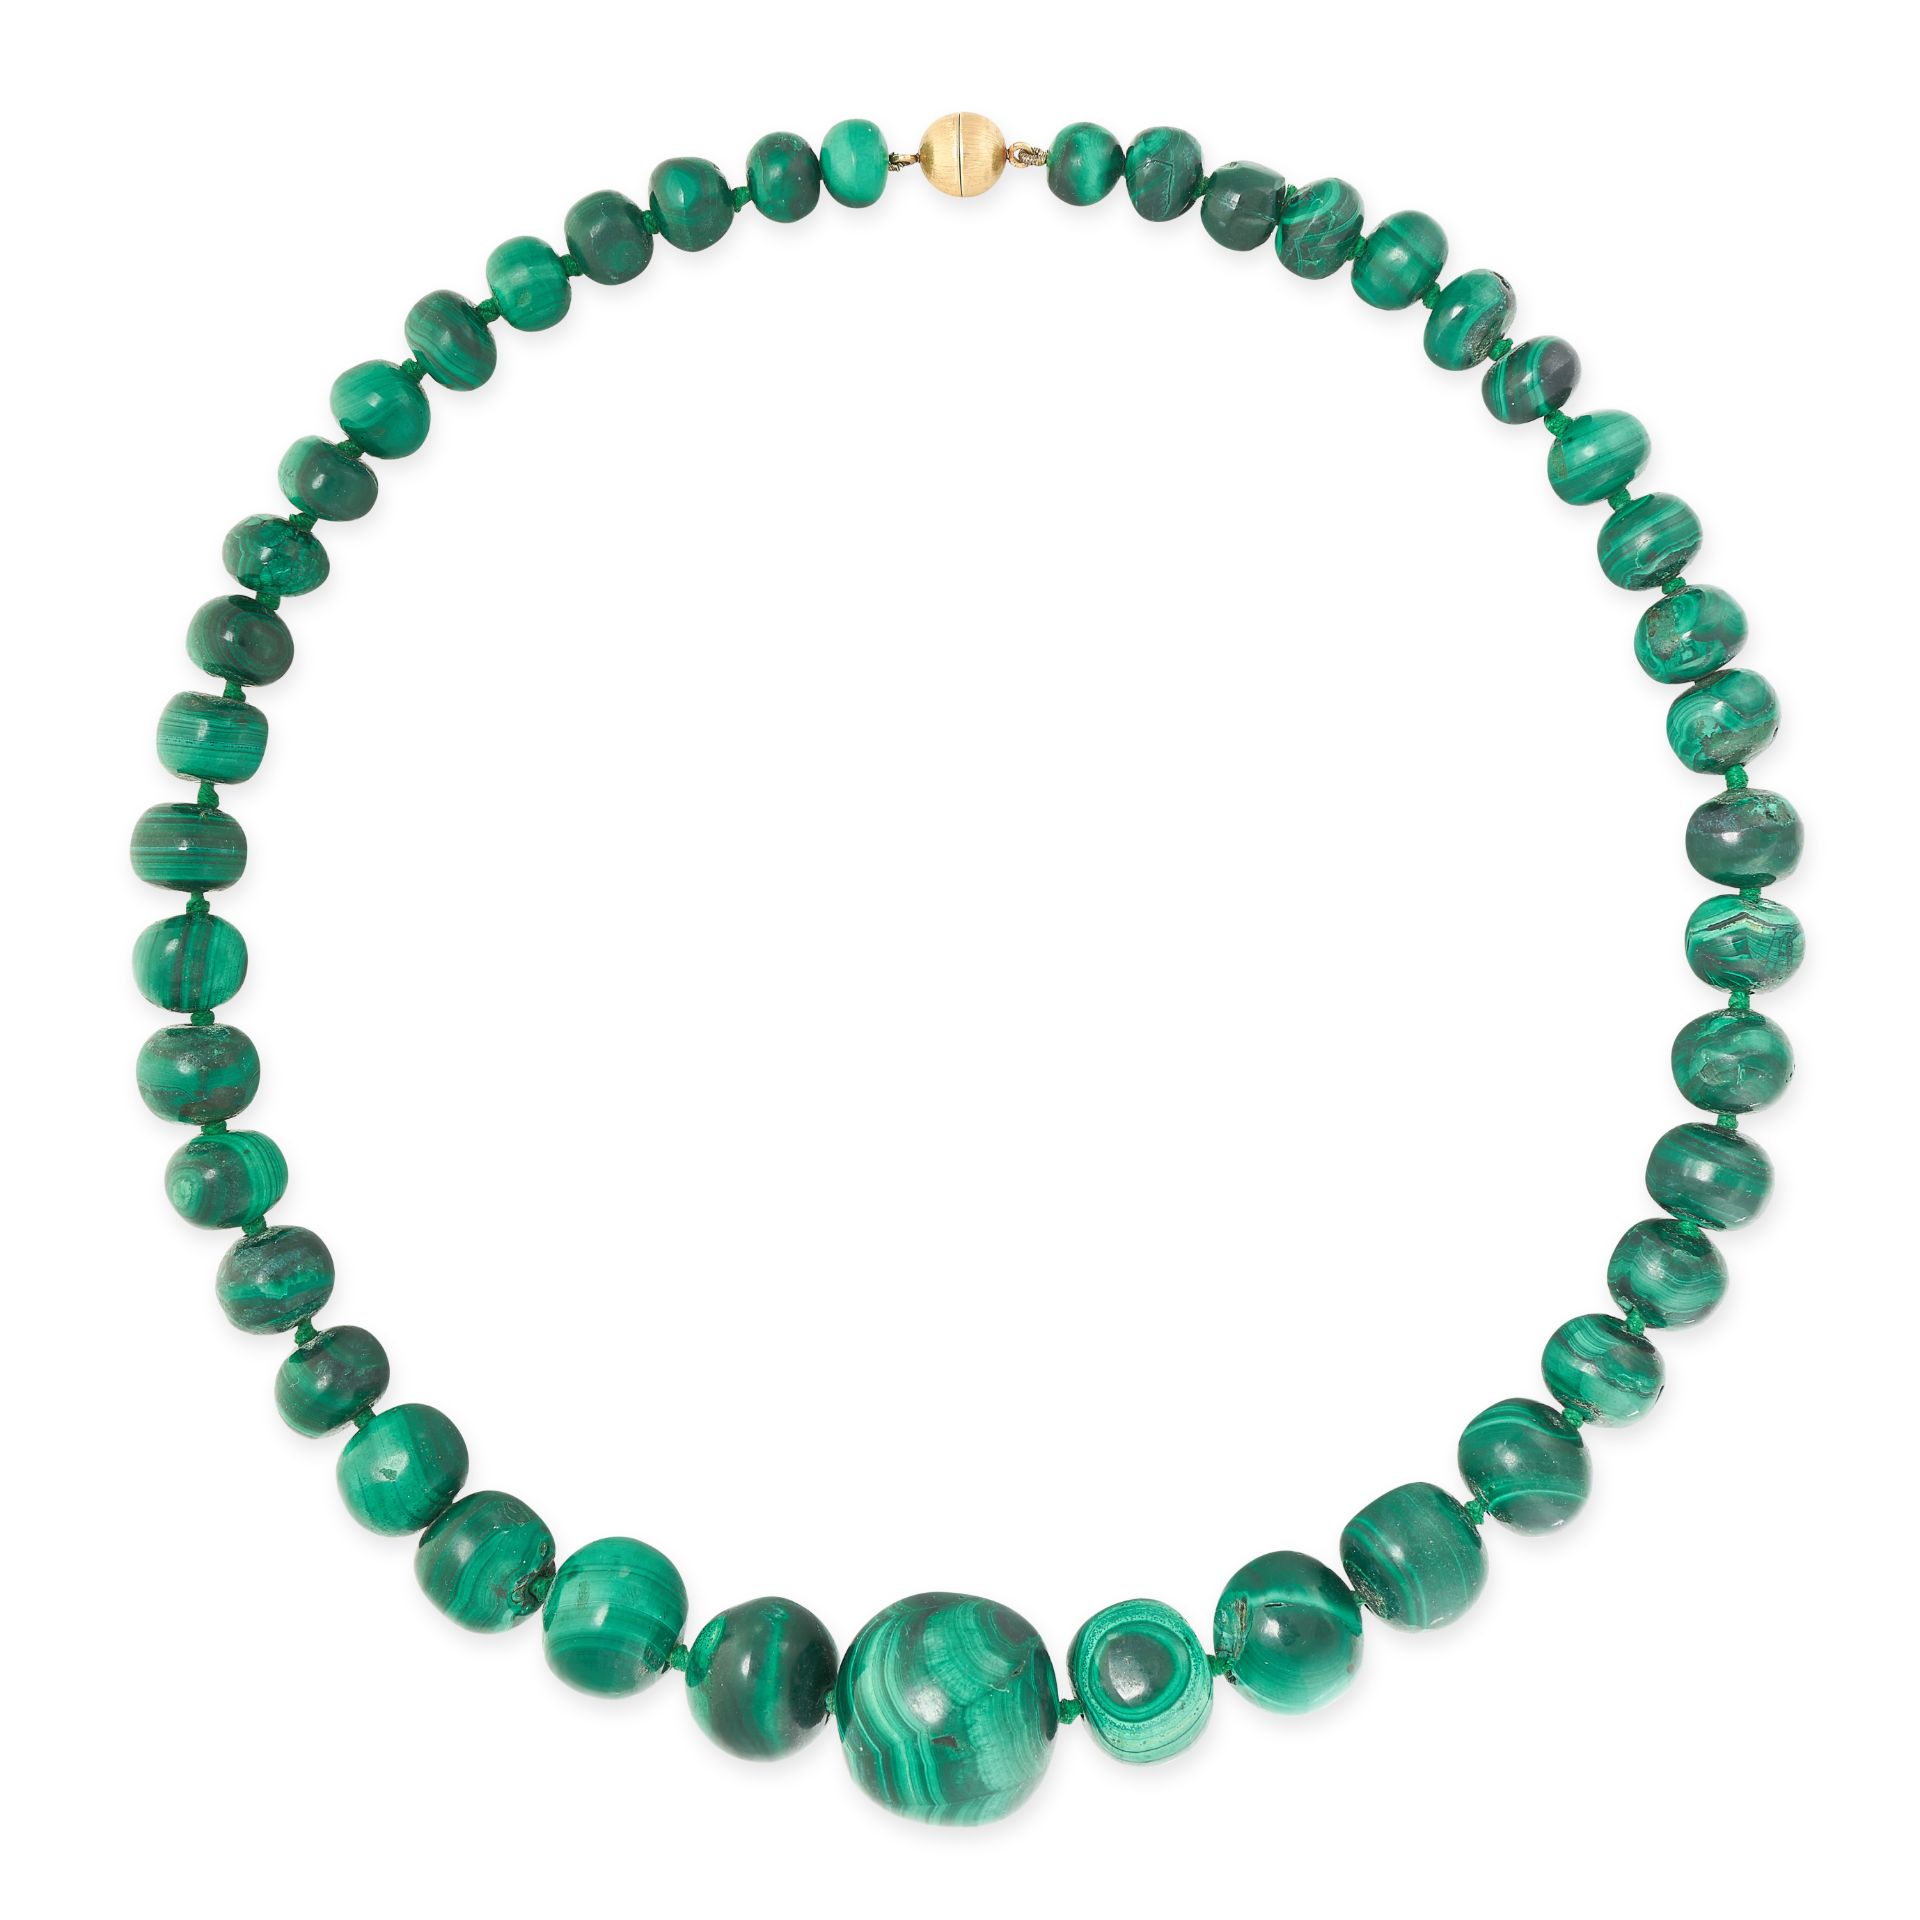 BUCCELLATI, A MALACHITE BEAD NECKLACE in 18ct yellow gold, comprising a single row of graduated